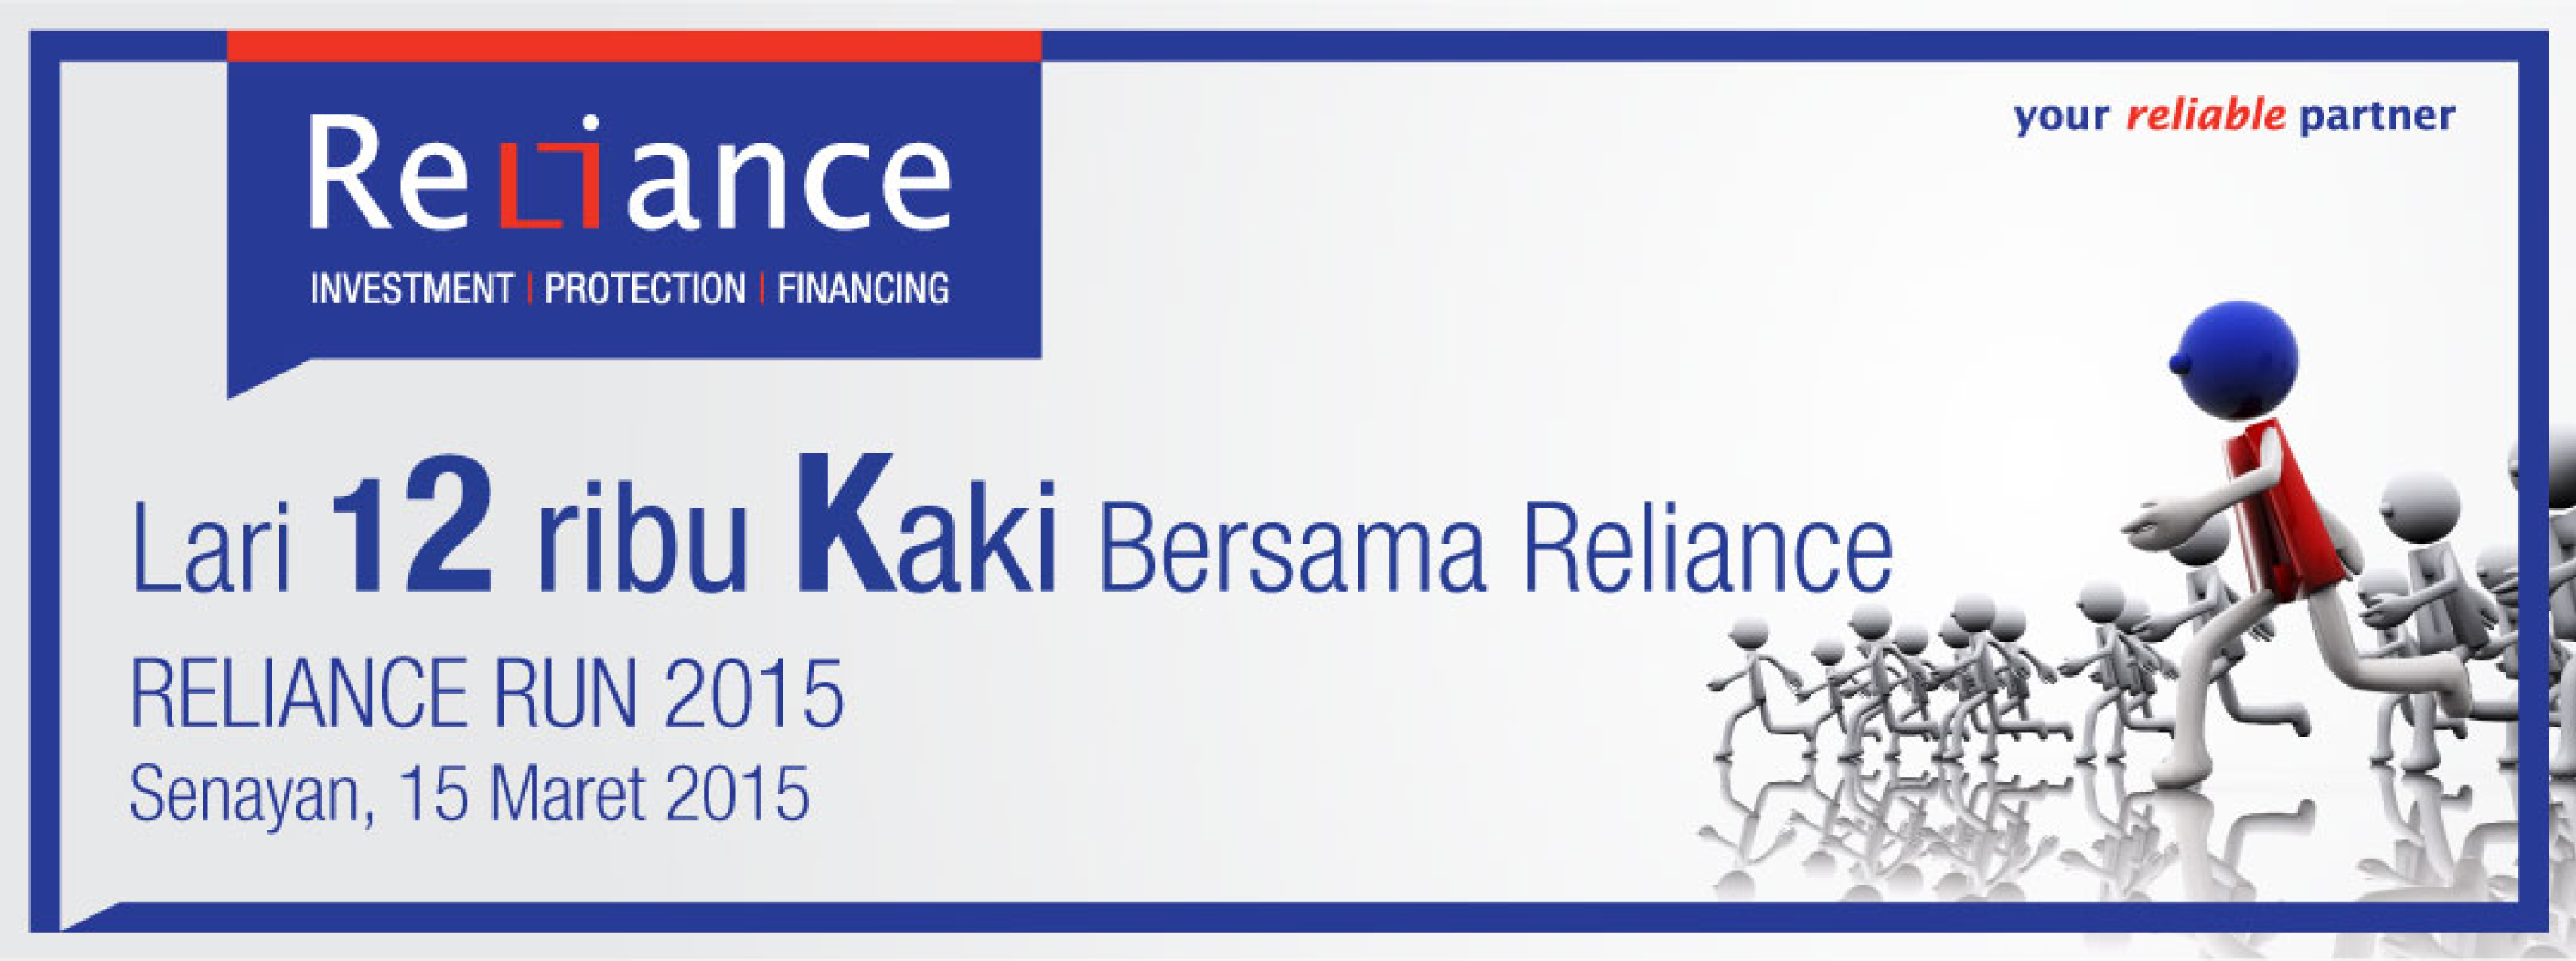 Reliance Run 2015 is Coming to Town!